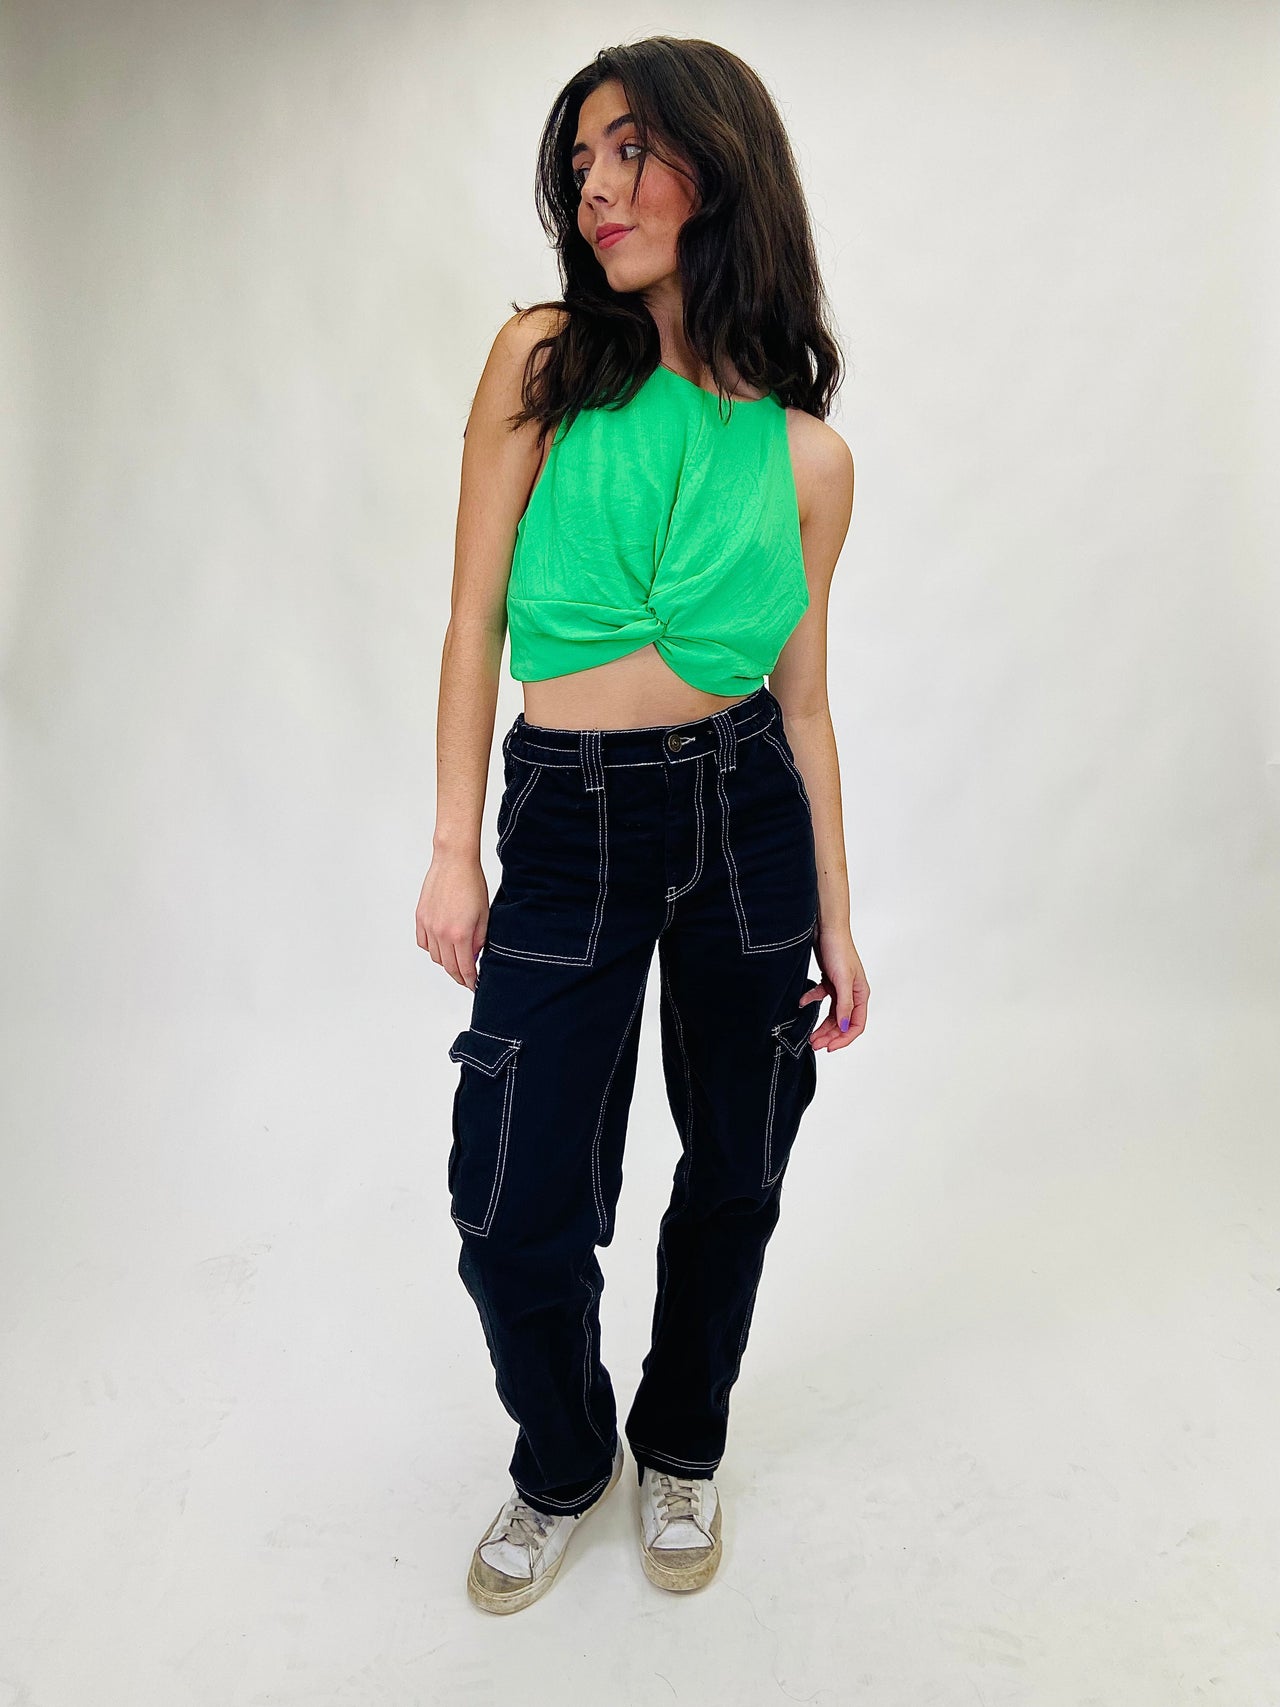 Sleeveless Halter O-Ring Crop Top - Green – Collette Clothing